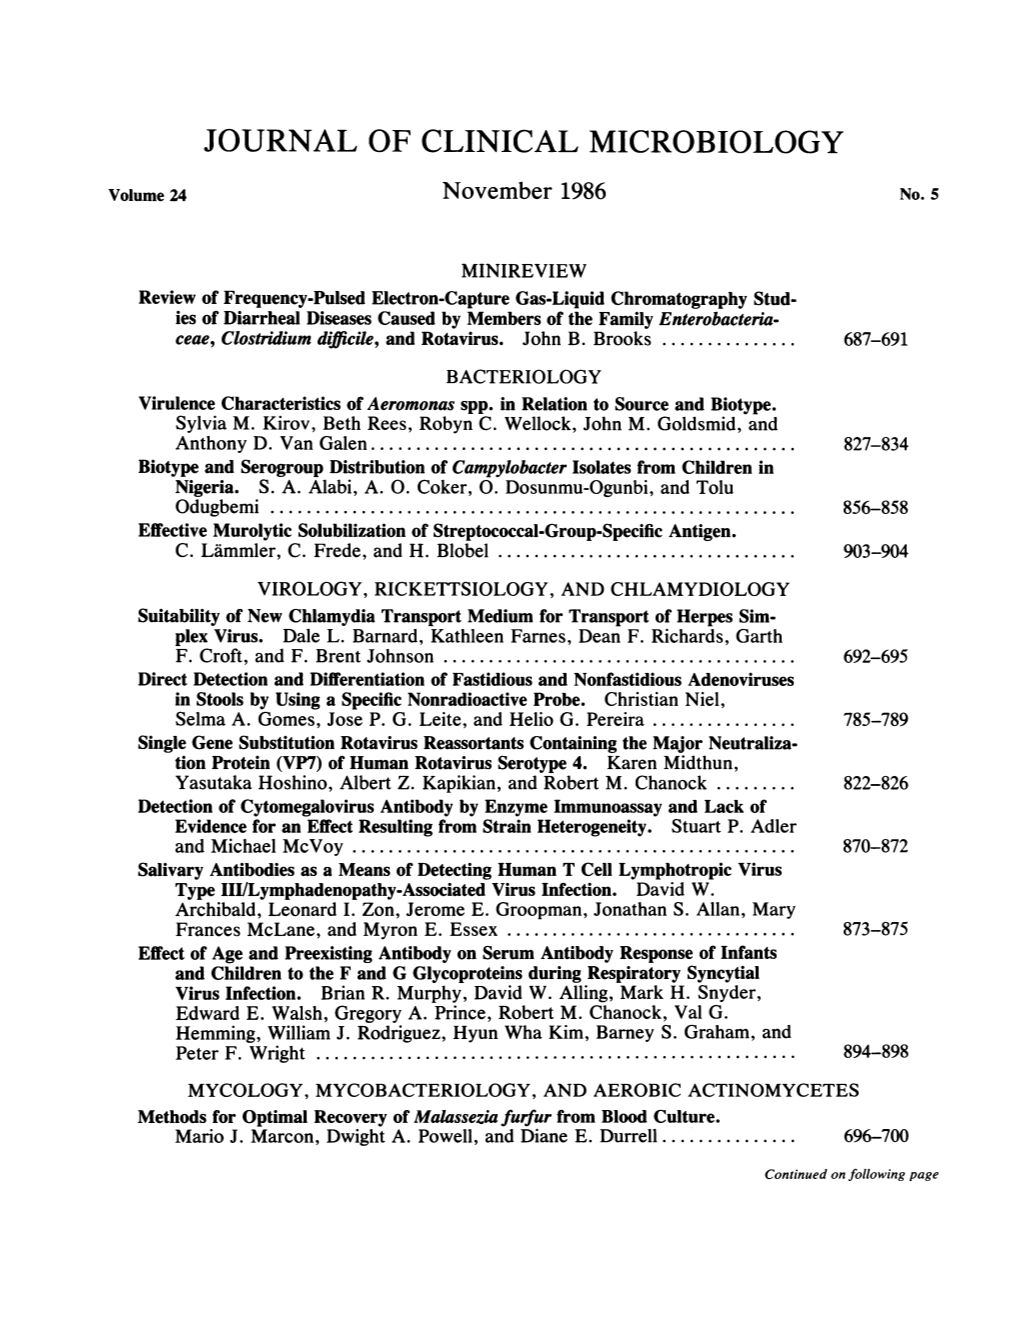 JOURNAL of CLINICAL MICROBIOLOGY Volume 24 November 1986 No.5